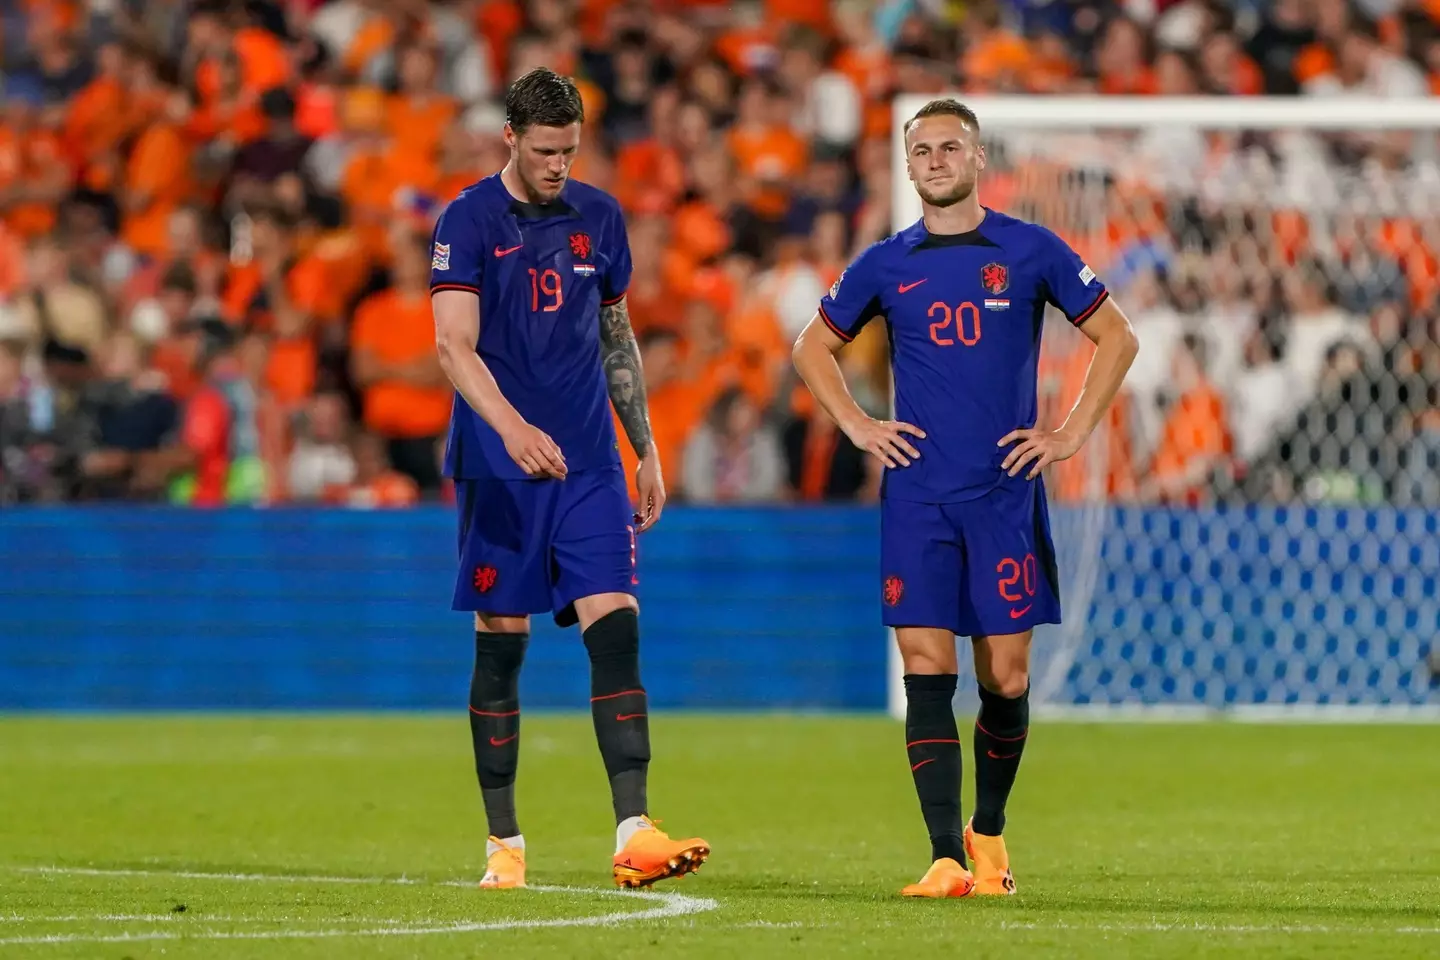 Wout Weghorst cuts a dejected figure after the Netherlands concede a goal. Image: Alamy